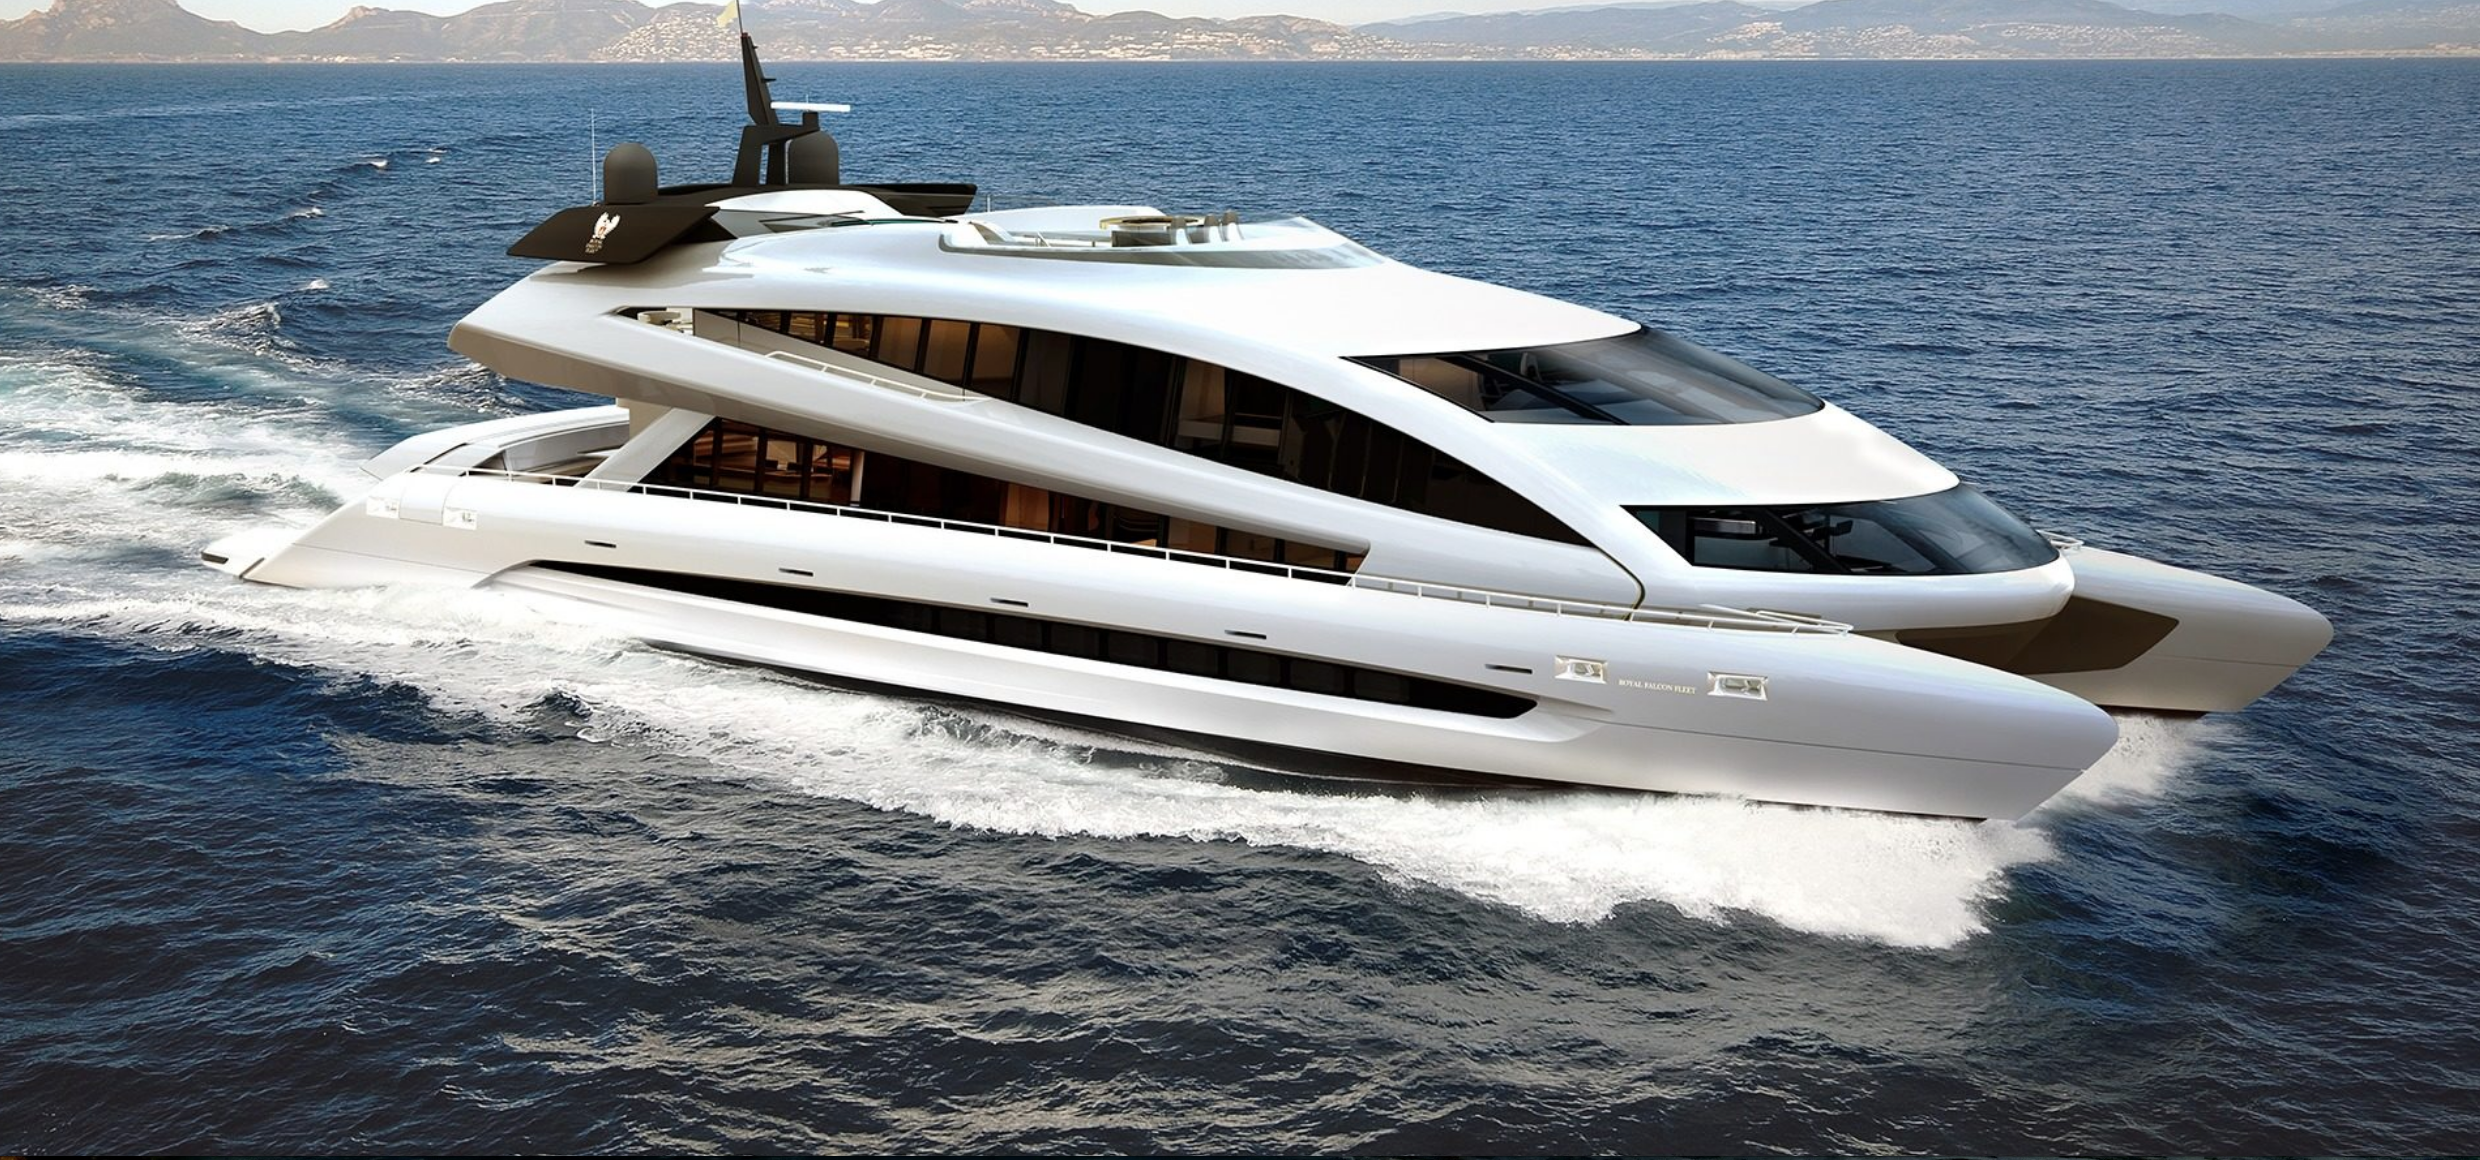 New Studio F A Porsche Royal Falcon One Superyacht Is Up For Sale Insidehook